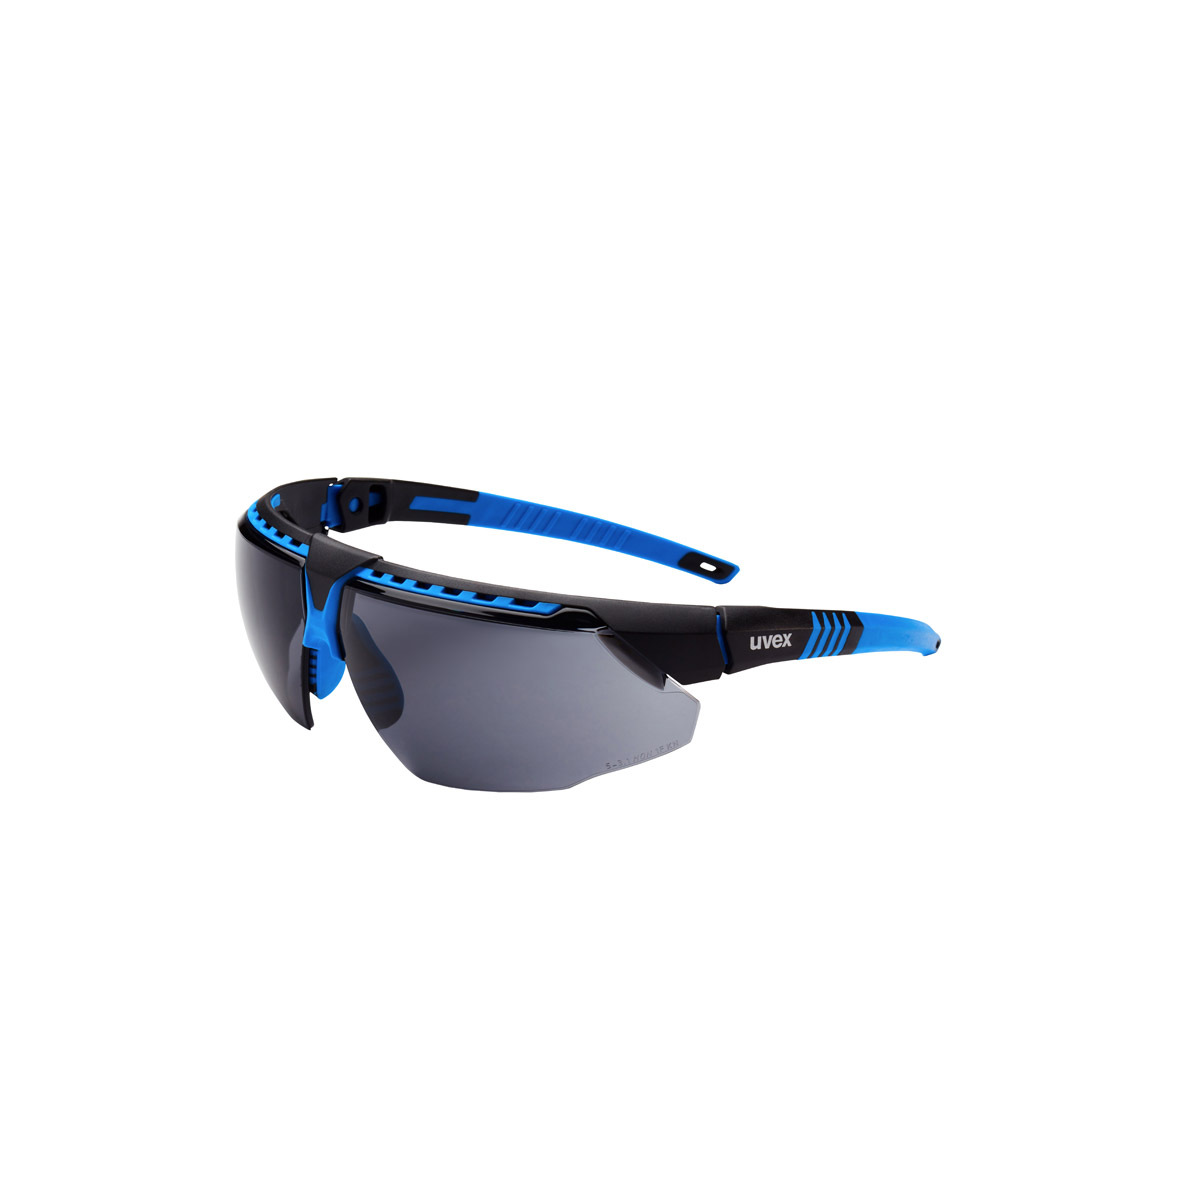 Honeywell Uvex Avatar™ Blue Safety Glasses With Gray Polycarbonate Anti-Fog/Anti-Scratch Lens (Availability restrictions apply.)